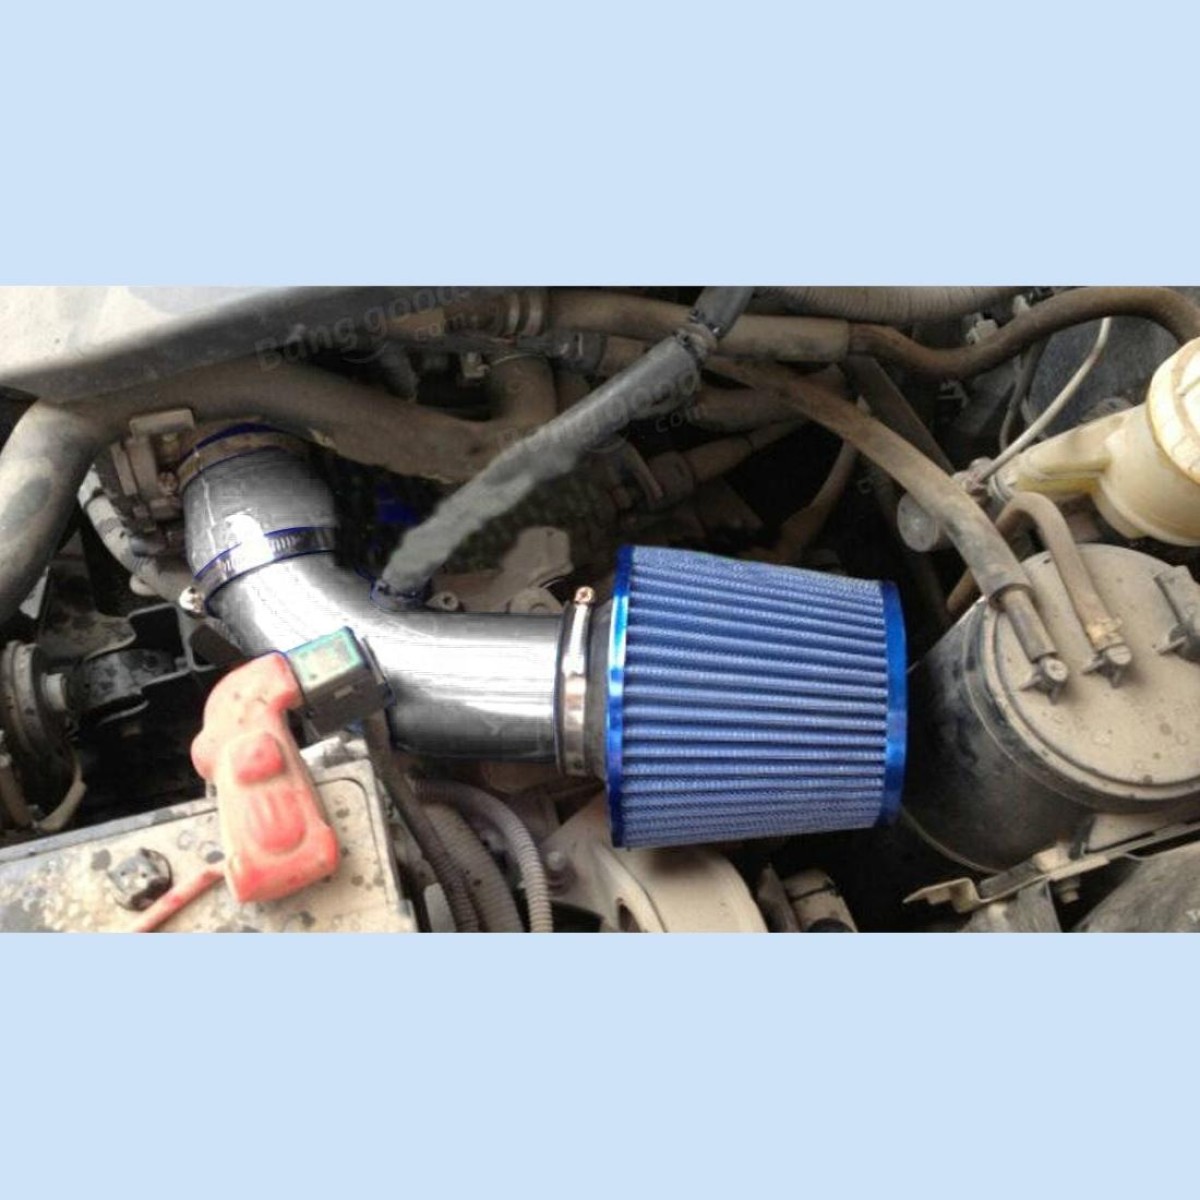 Universal  Air Intake Pipe Super Power Flow Air Intakes Short Cold Racing Aluminium Air Intake Pipe Hose with Cone Filter Kit System (Silver)